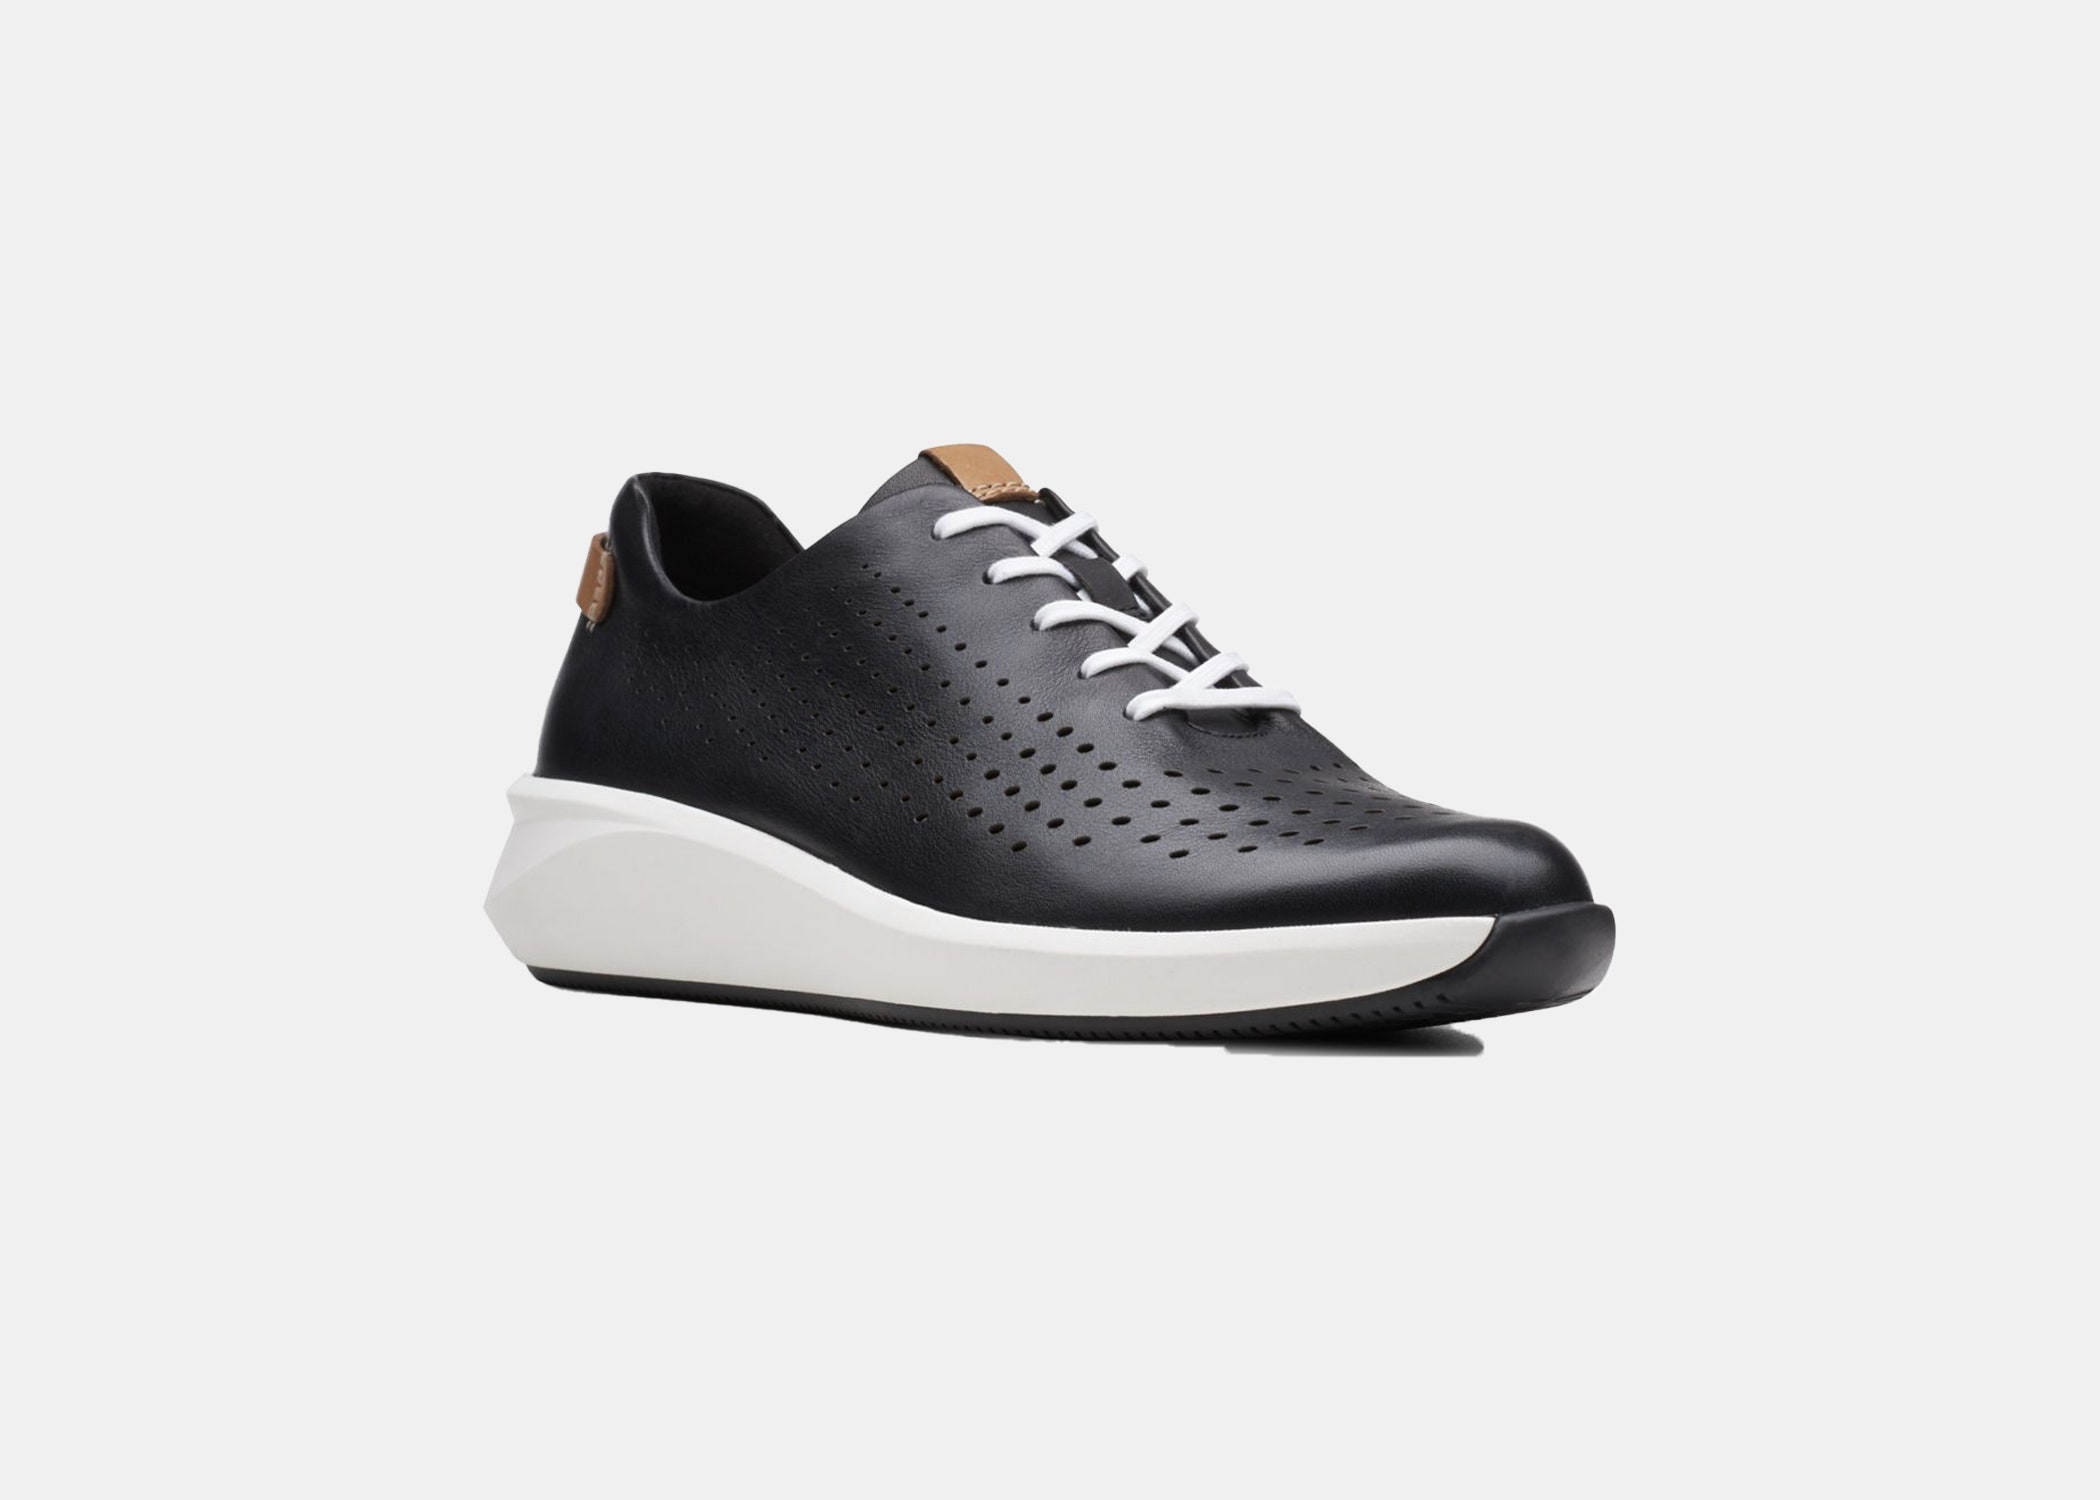 These laceless athletic shoes were designed with moisture-wicking technology and a perforated upper—meaning they'll smell as fresh as they look. Lightweight, leather-lined, and casually luxe, these shoes are a go-to for city vacations. $130, Amazon. <a href="https://www.amazon.com/Clarks-Rio-Tie-Navy-Nubuck/dp/B07VRTCZVR/ref=asc_df_B07VRTCZVR/">Get it now!</a>